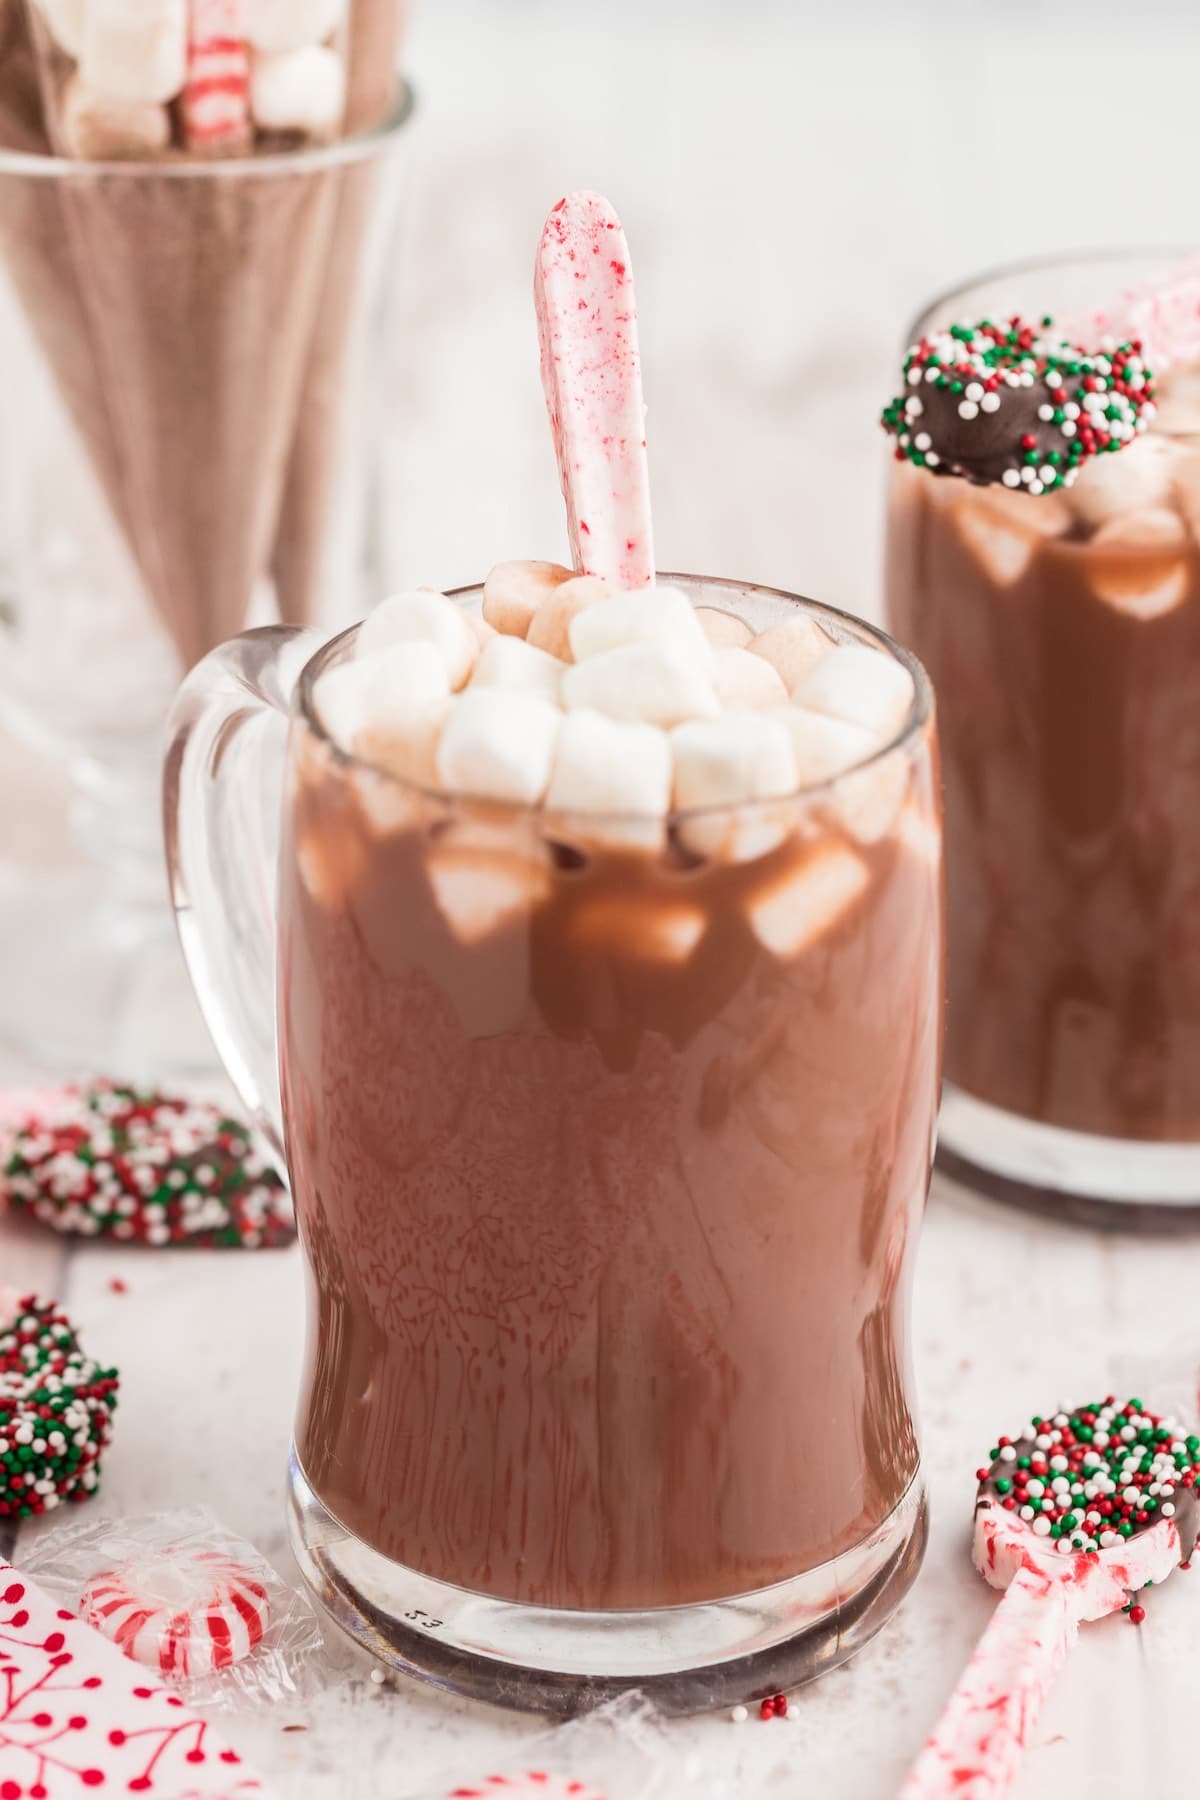 peppermint candy spoon dipped in a glass of hot chocolate with marshmallows on top.